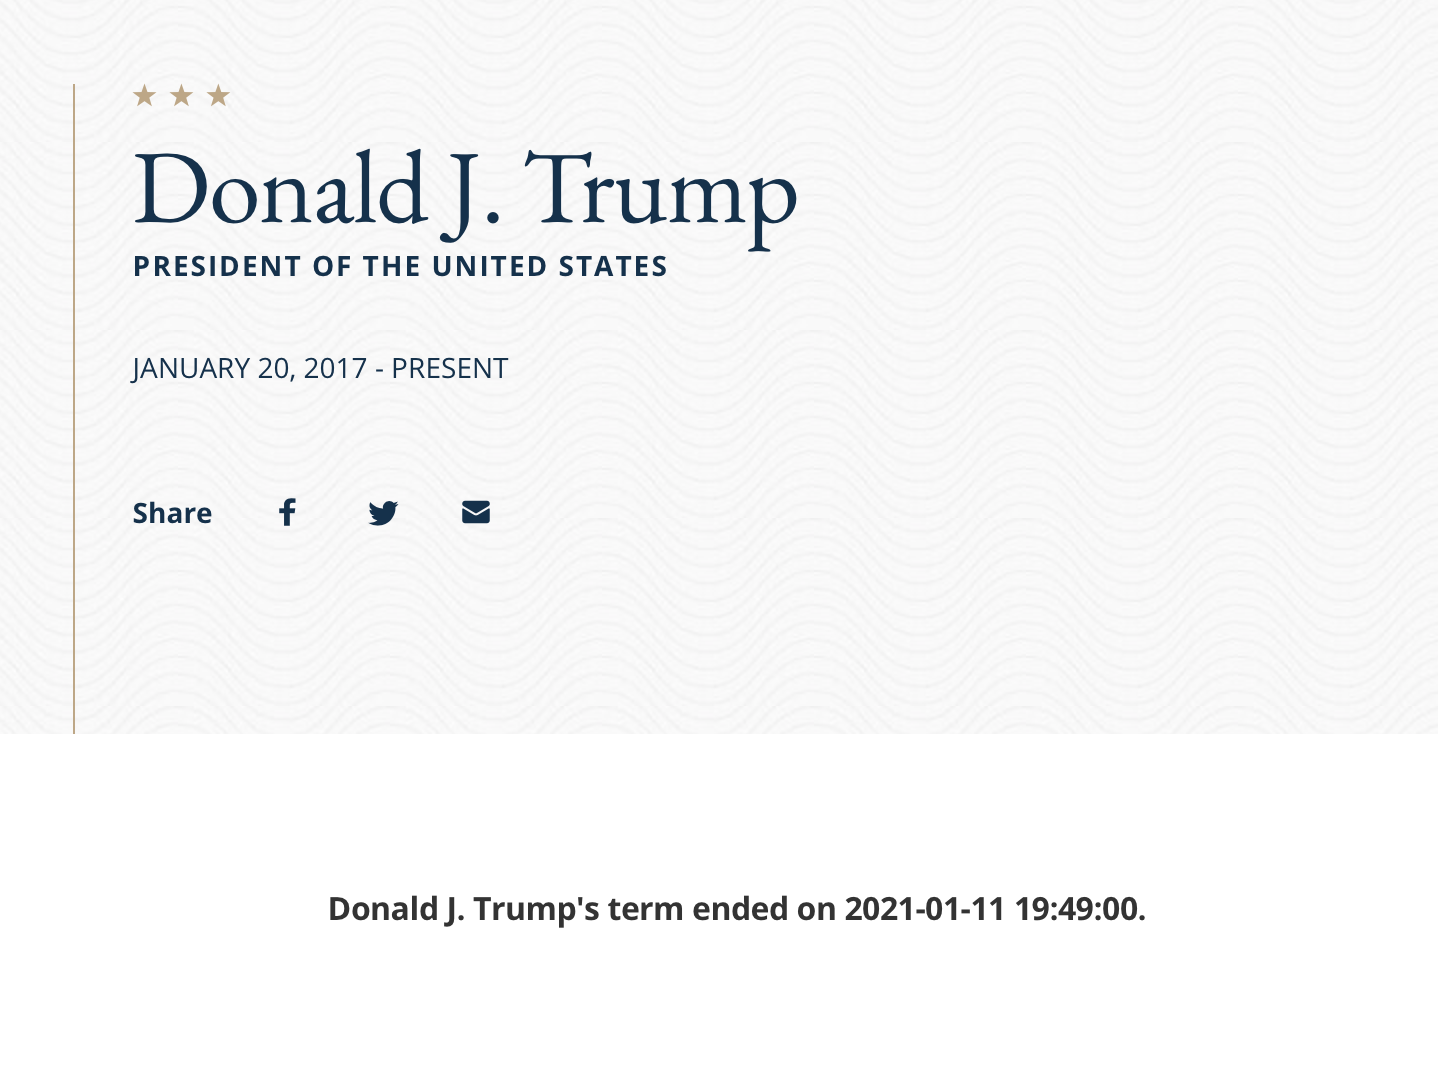 The State Department website vaguely claims that “Trump’s term has ended” today